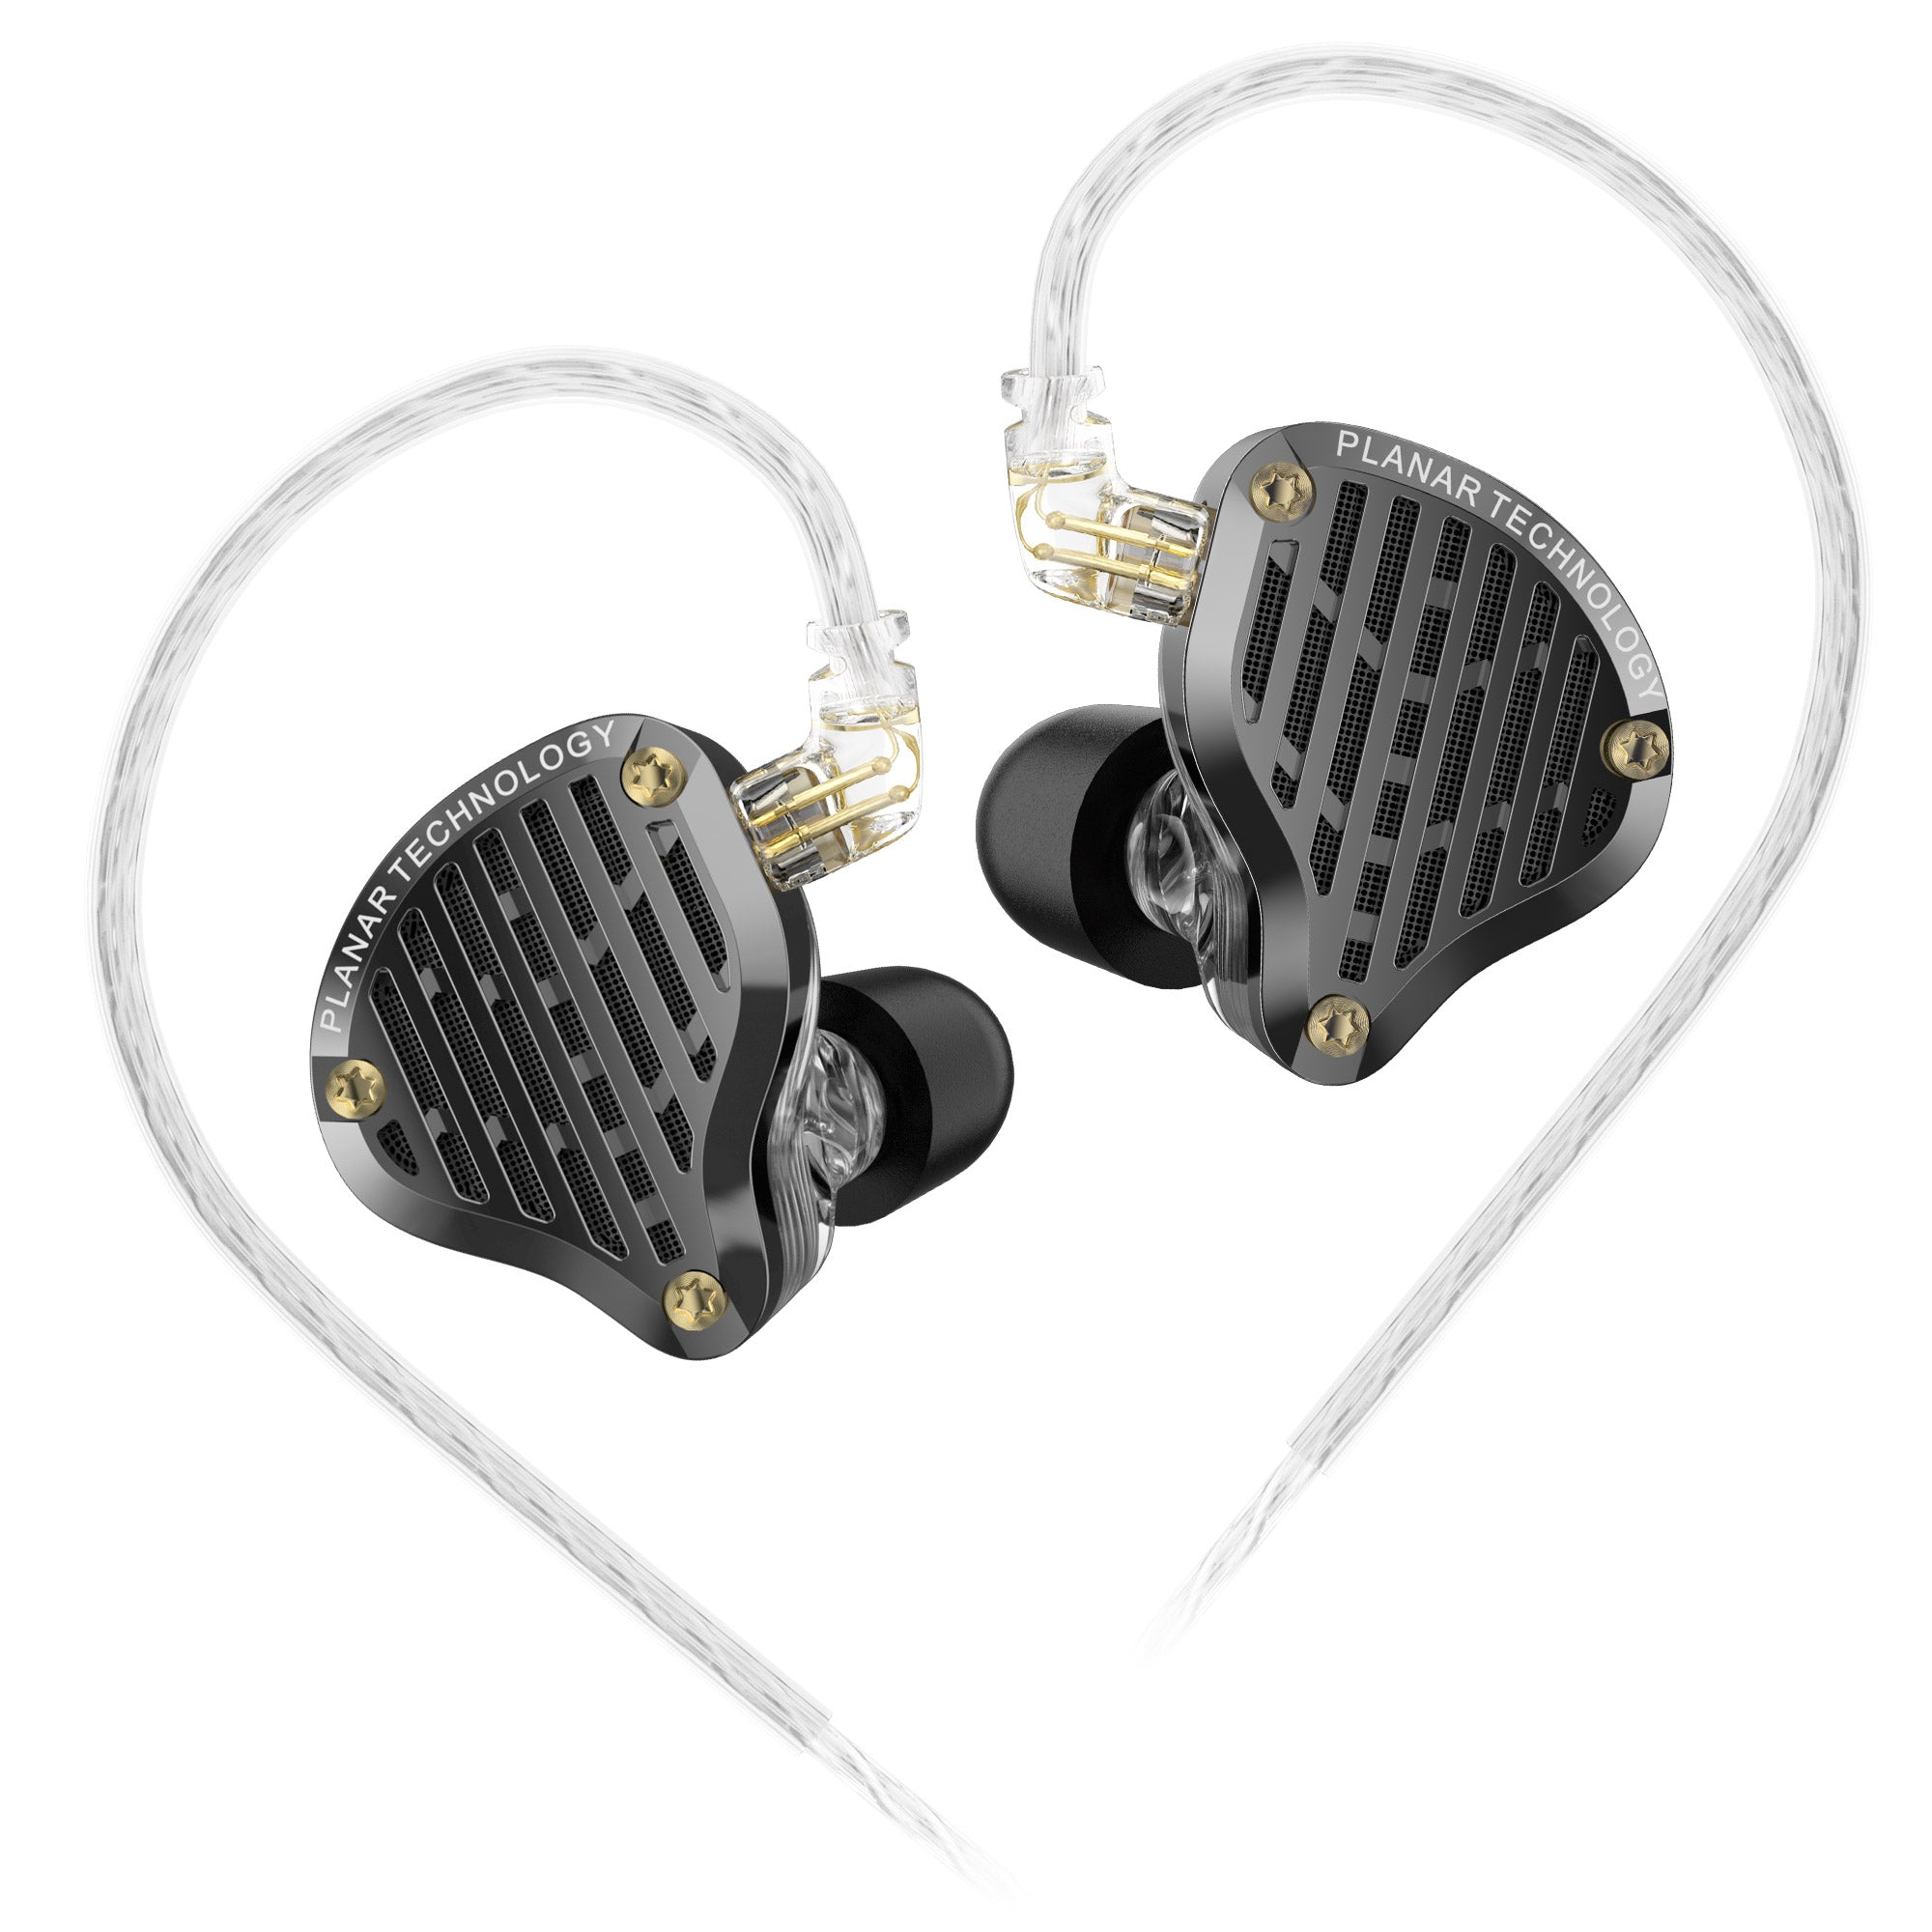 All products – KZ Headphones